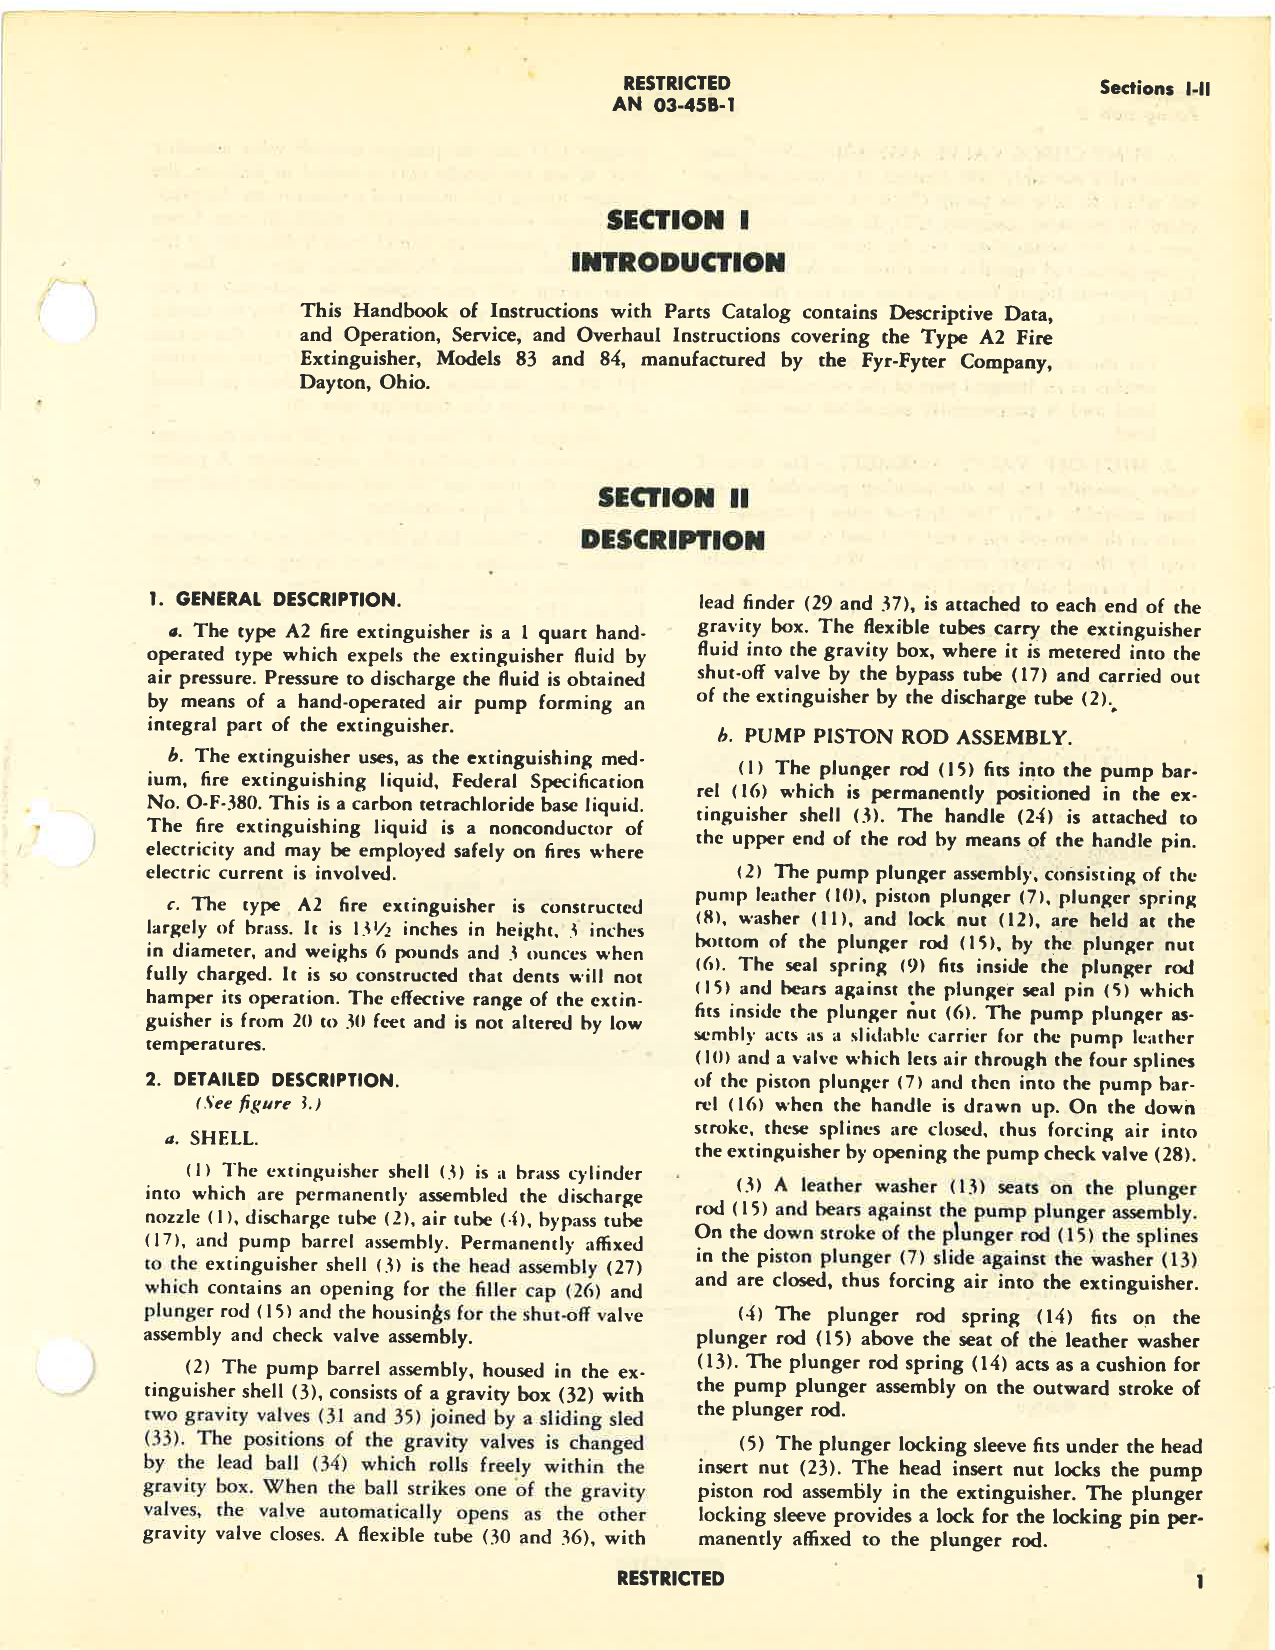 Sample page 5 from AirCorps Library document: Operation, Service, & Overhaul Instructions with Parts Catalog for Fire Extinguisher Type A-2